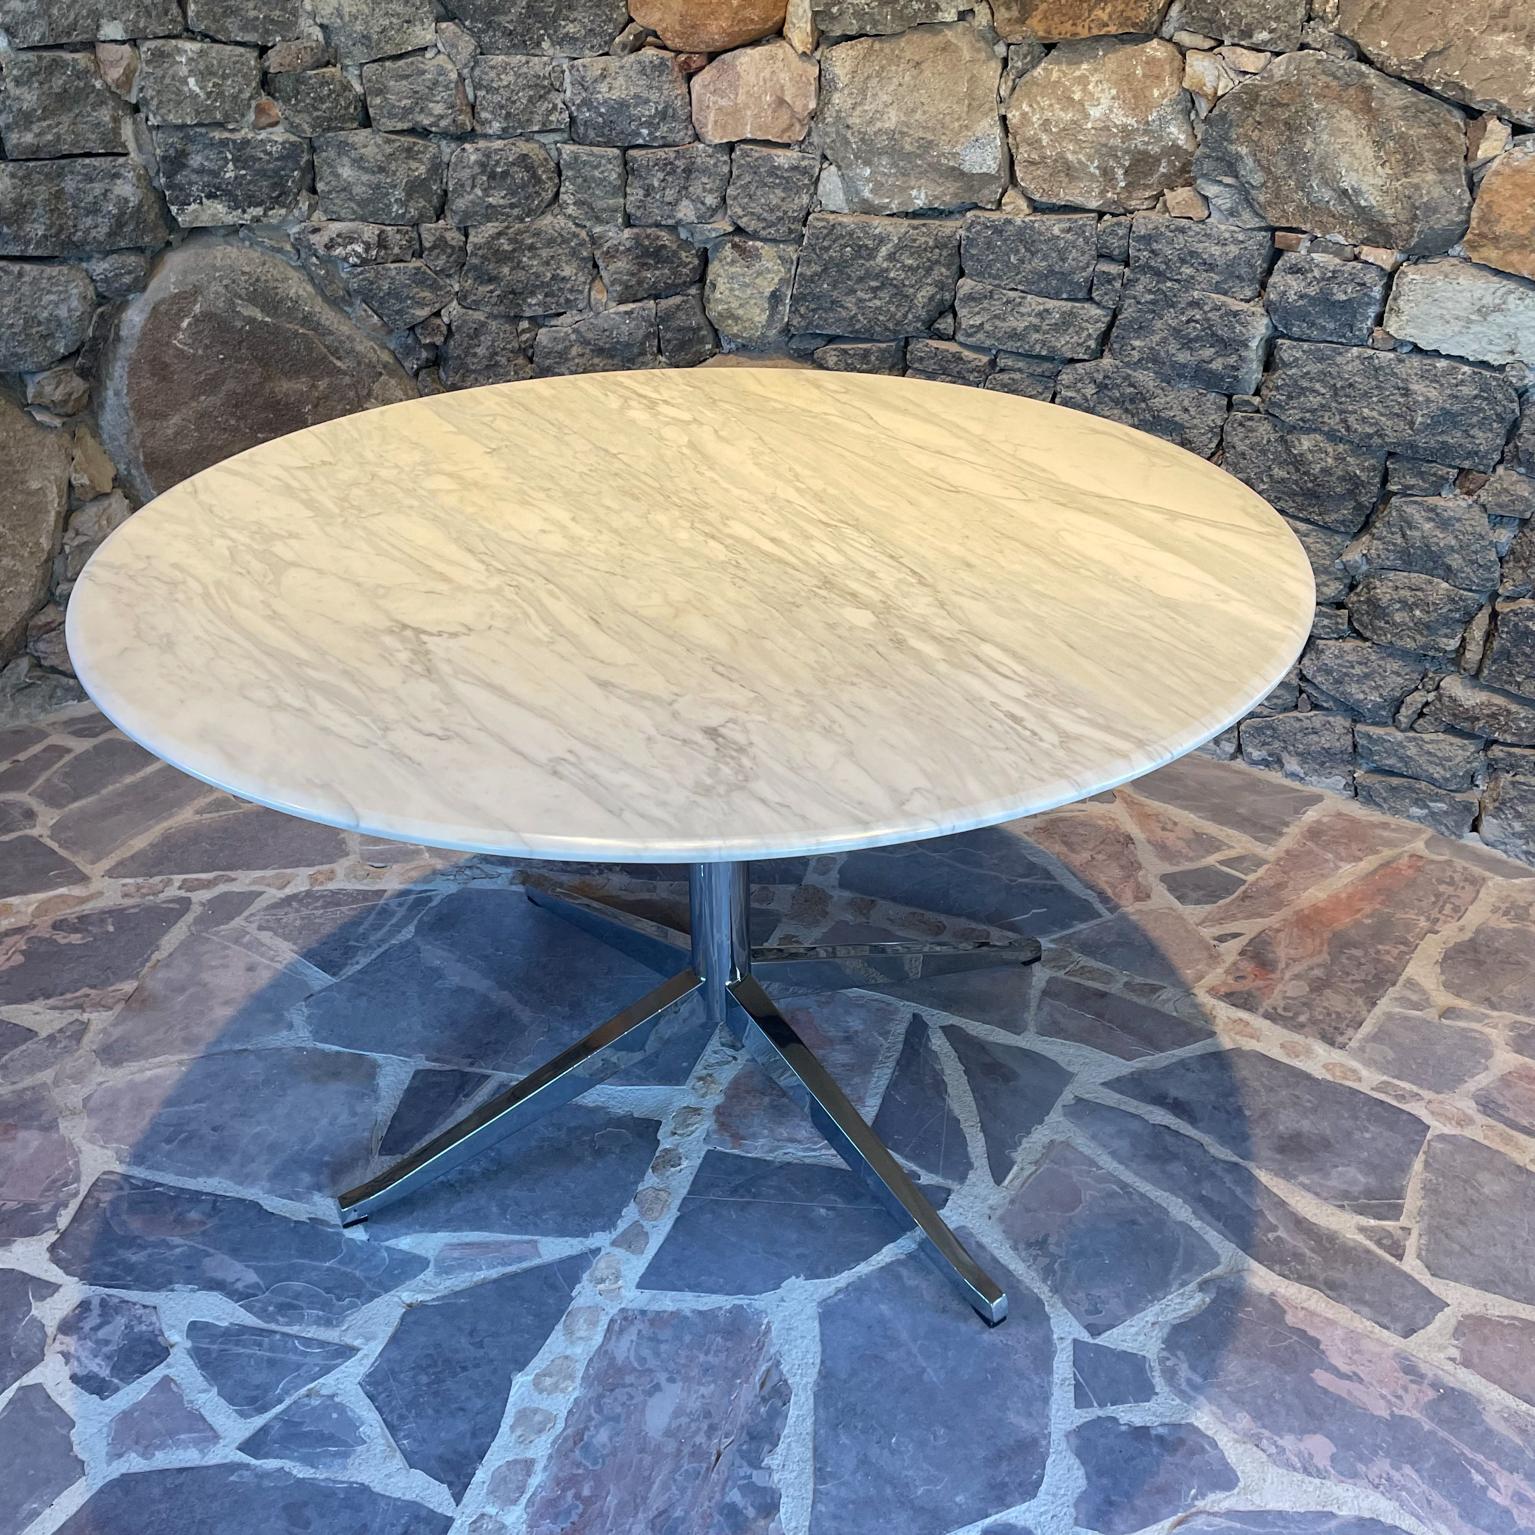 1961 Classic Round Knoll Dining Table Star Chrome Base Restored and Ready 5